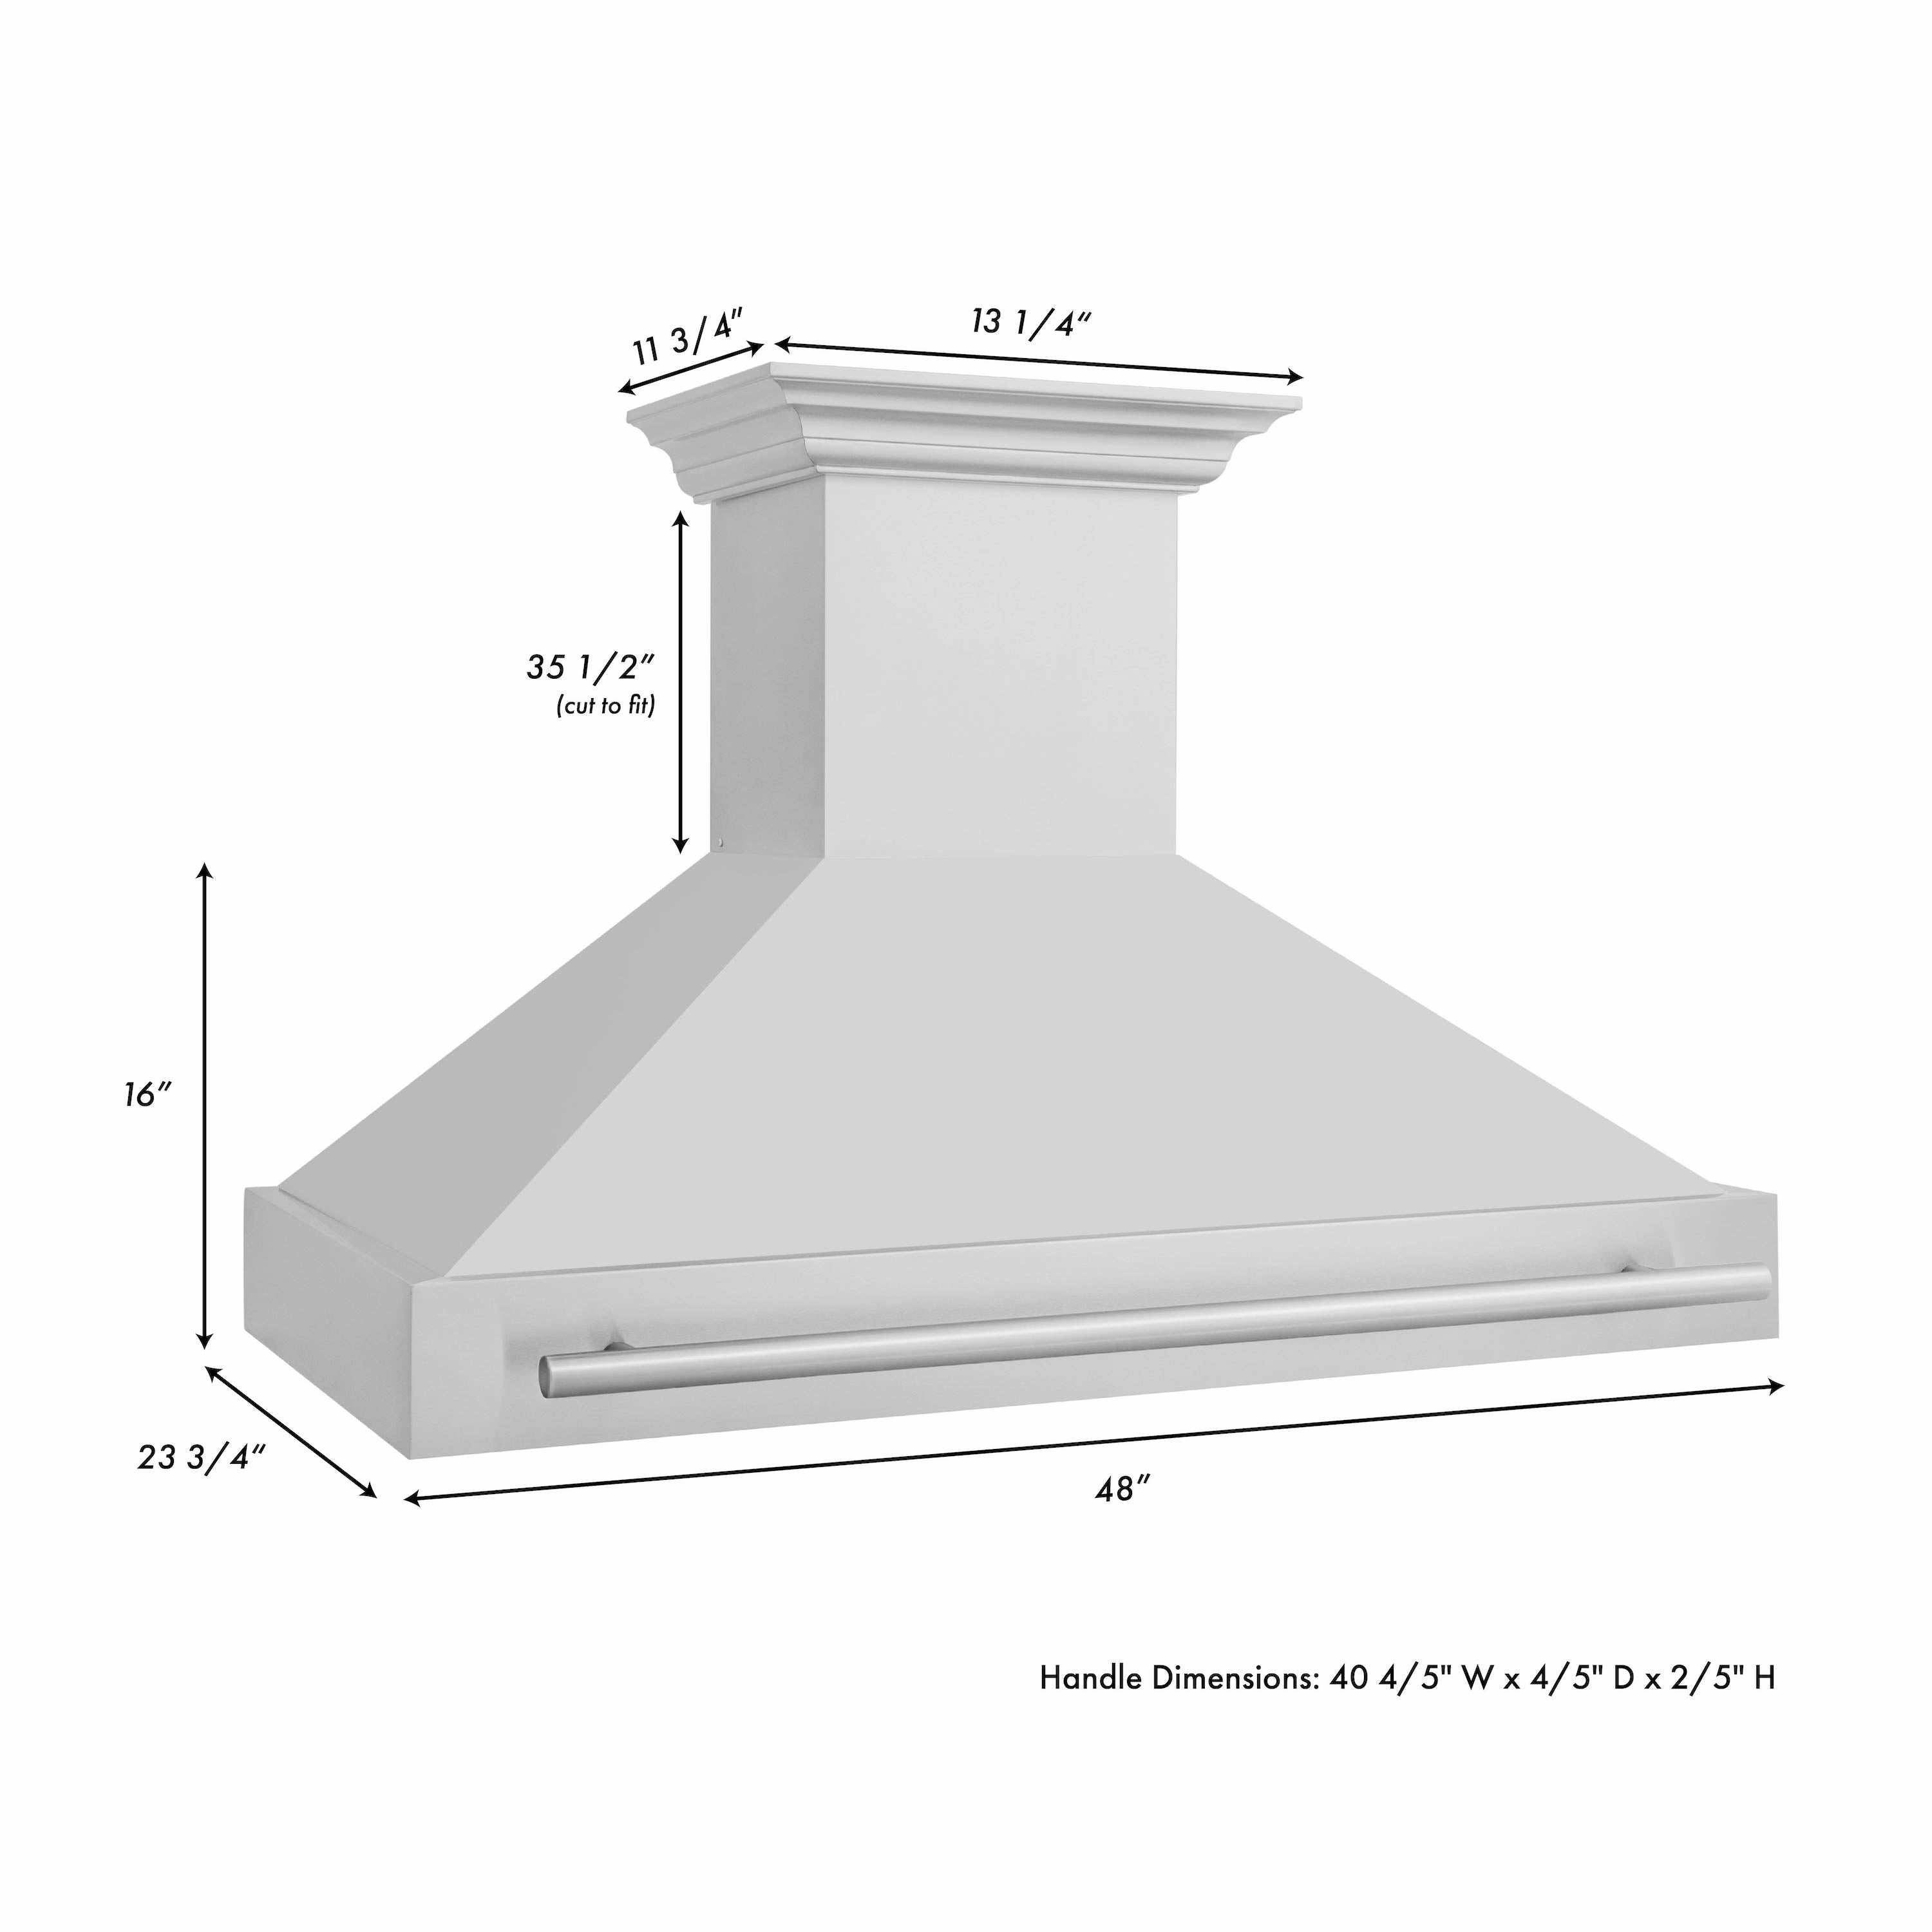 ZLINE 48 in. Stainless Steel Range Hood with Stainless Steel Handle (8654STX-48) dimensional diagram and measurements.